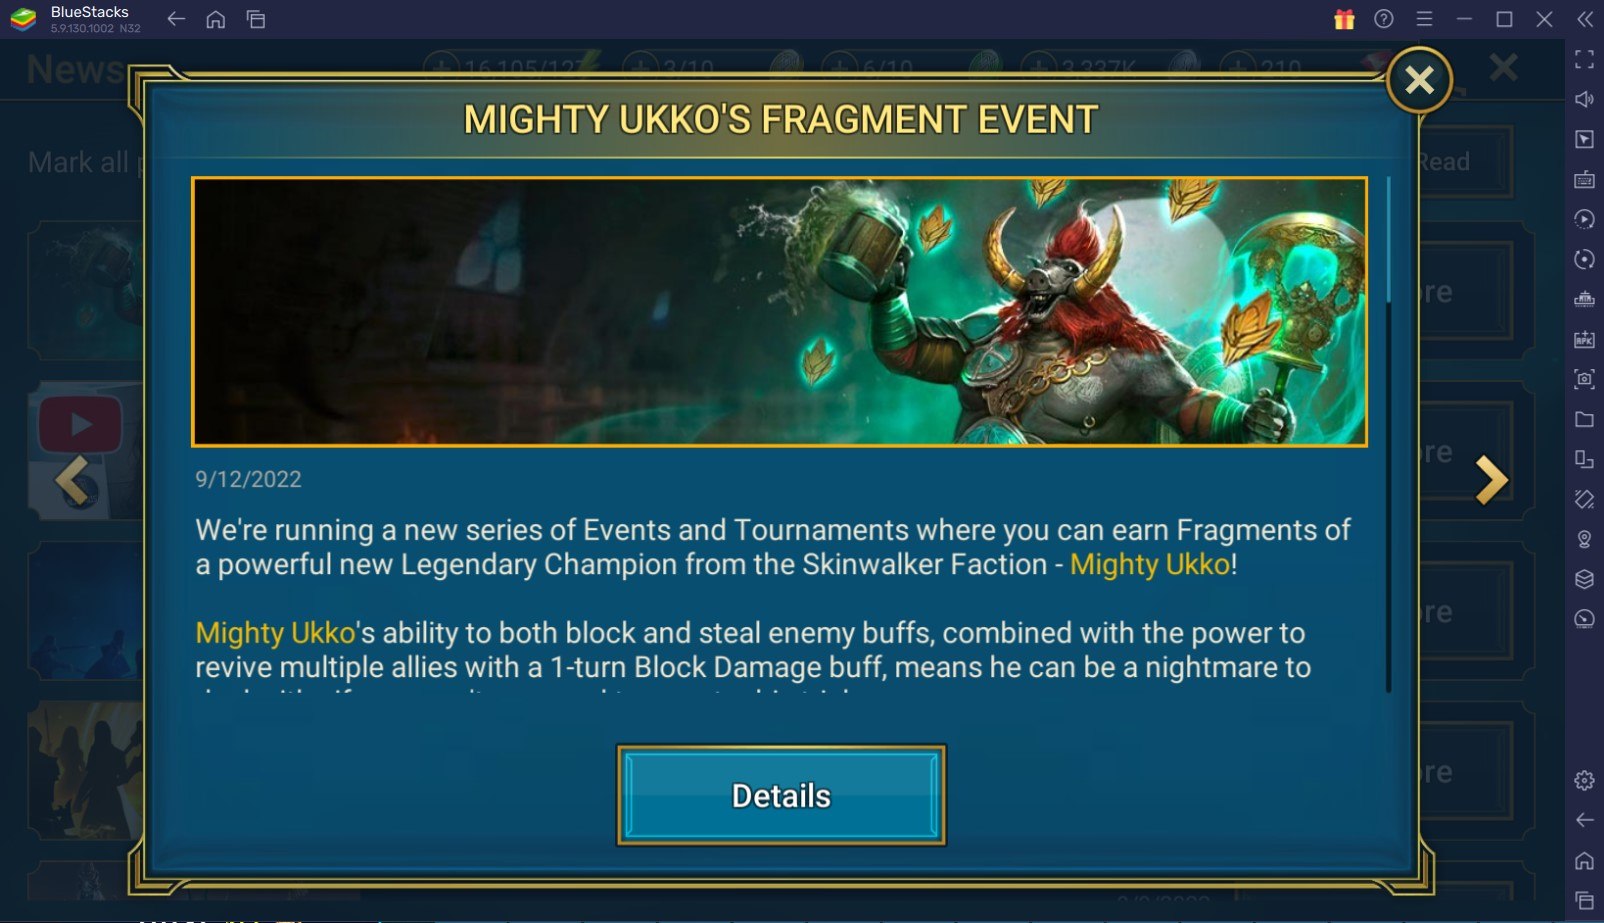 RAID: Shadow Legends – Mighty Ukko Fragment Fusion Event Guide